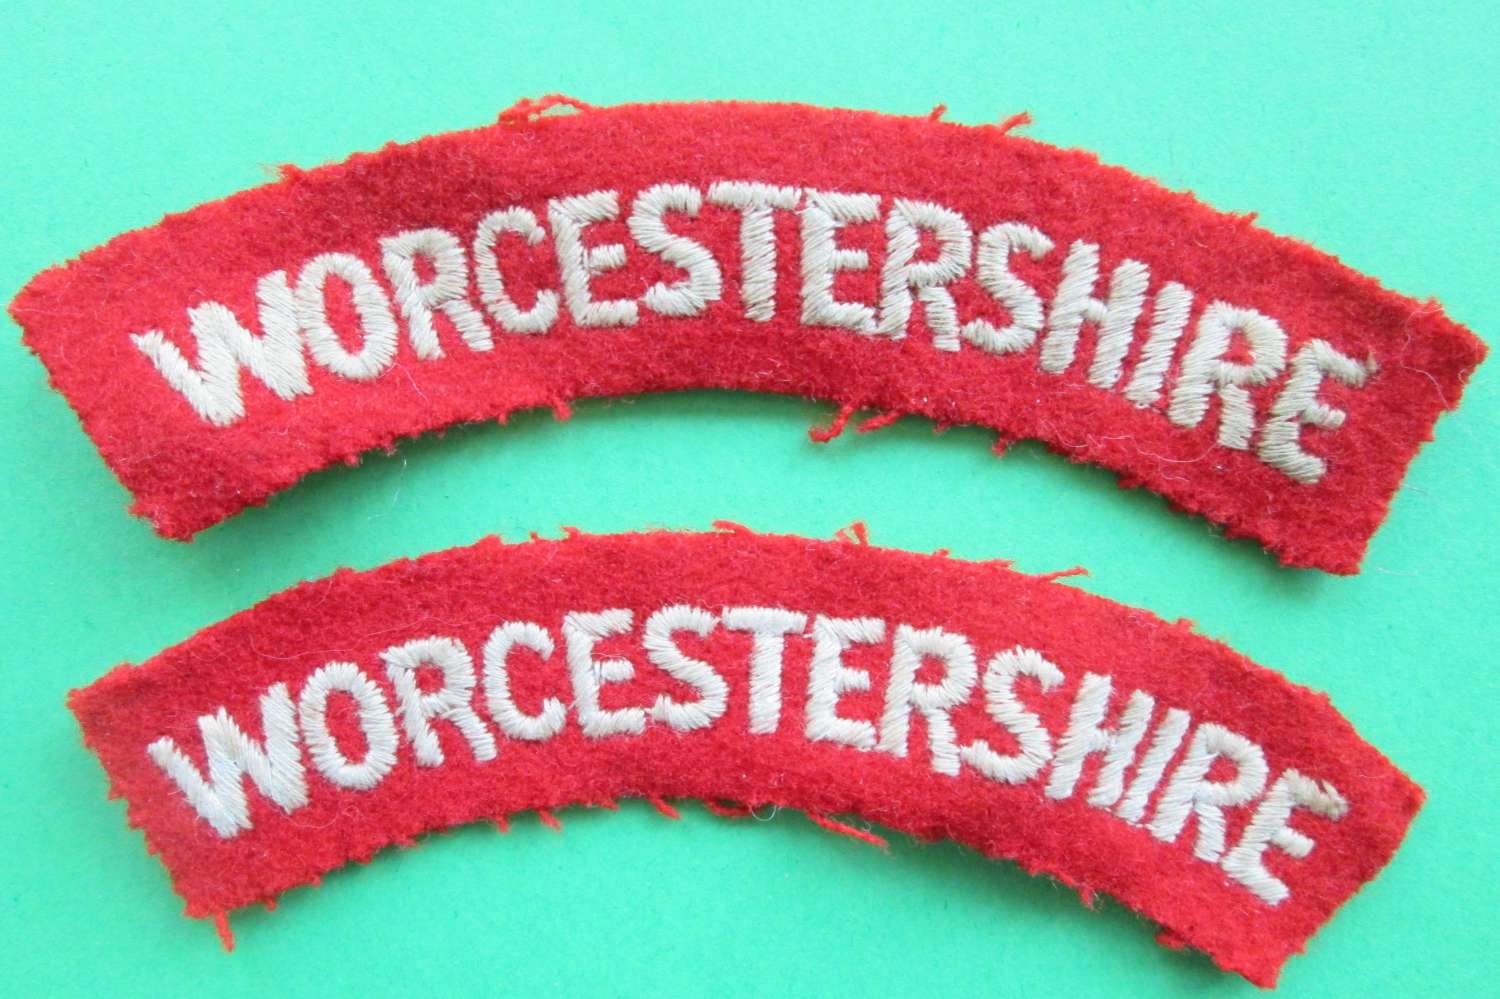 A PAIR OF WORCESTERSHIRE SHOULDER TITLES